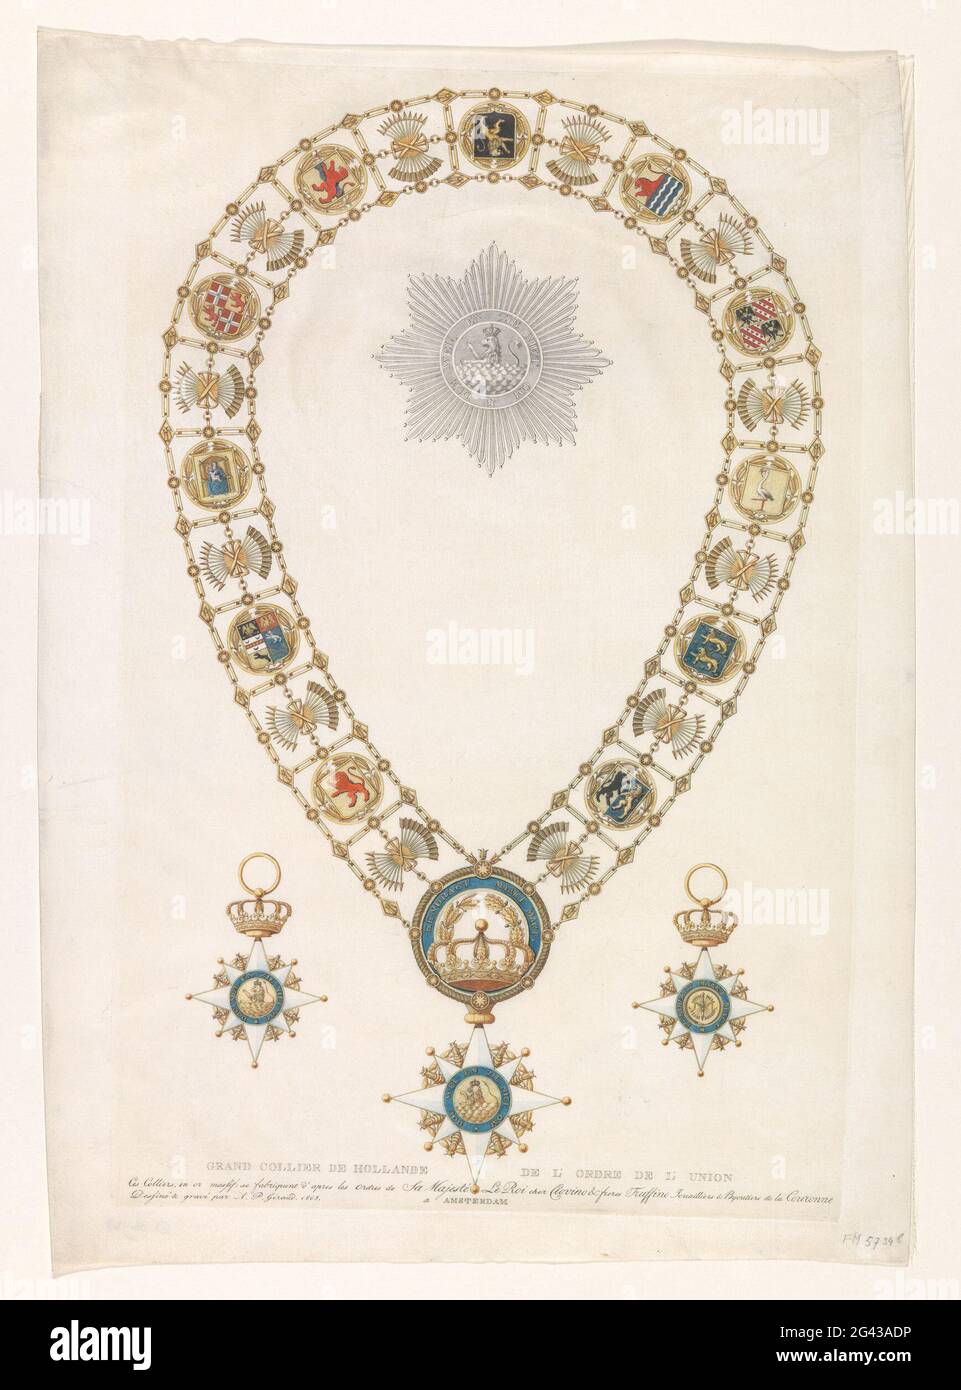 Order chain with the Grand Cross of the Royal Order of Holland, 1807; Grand  Collier De Hollande de l'Ordre de l'Union. The big chain with the cross of  the Royal Order of